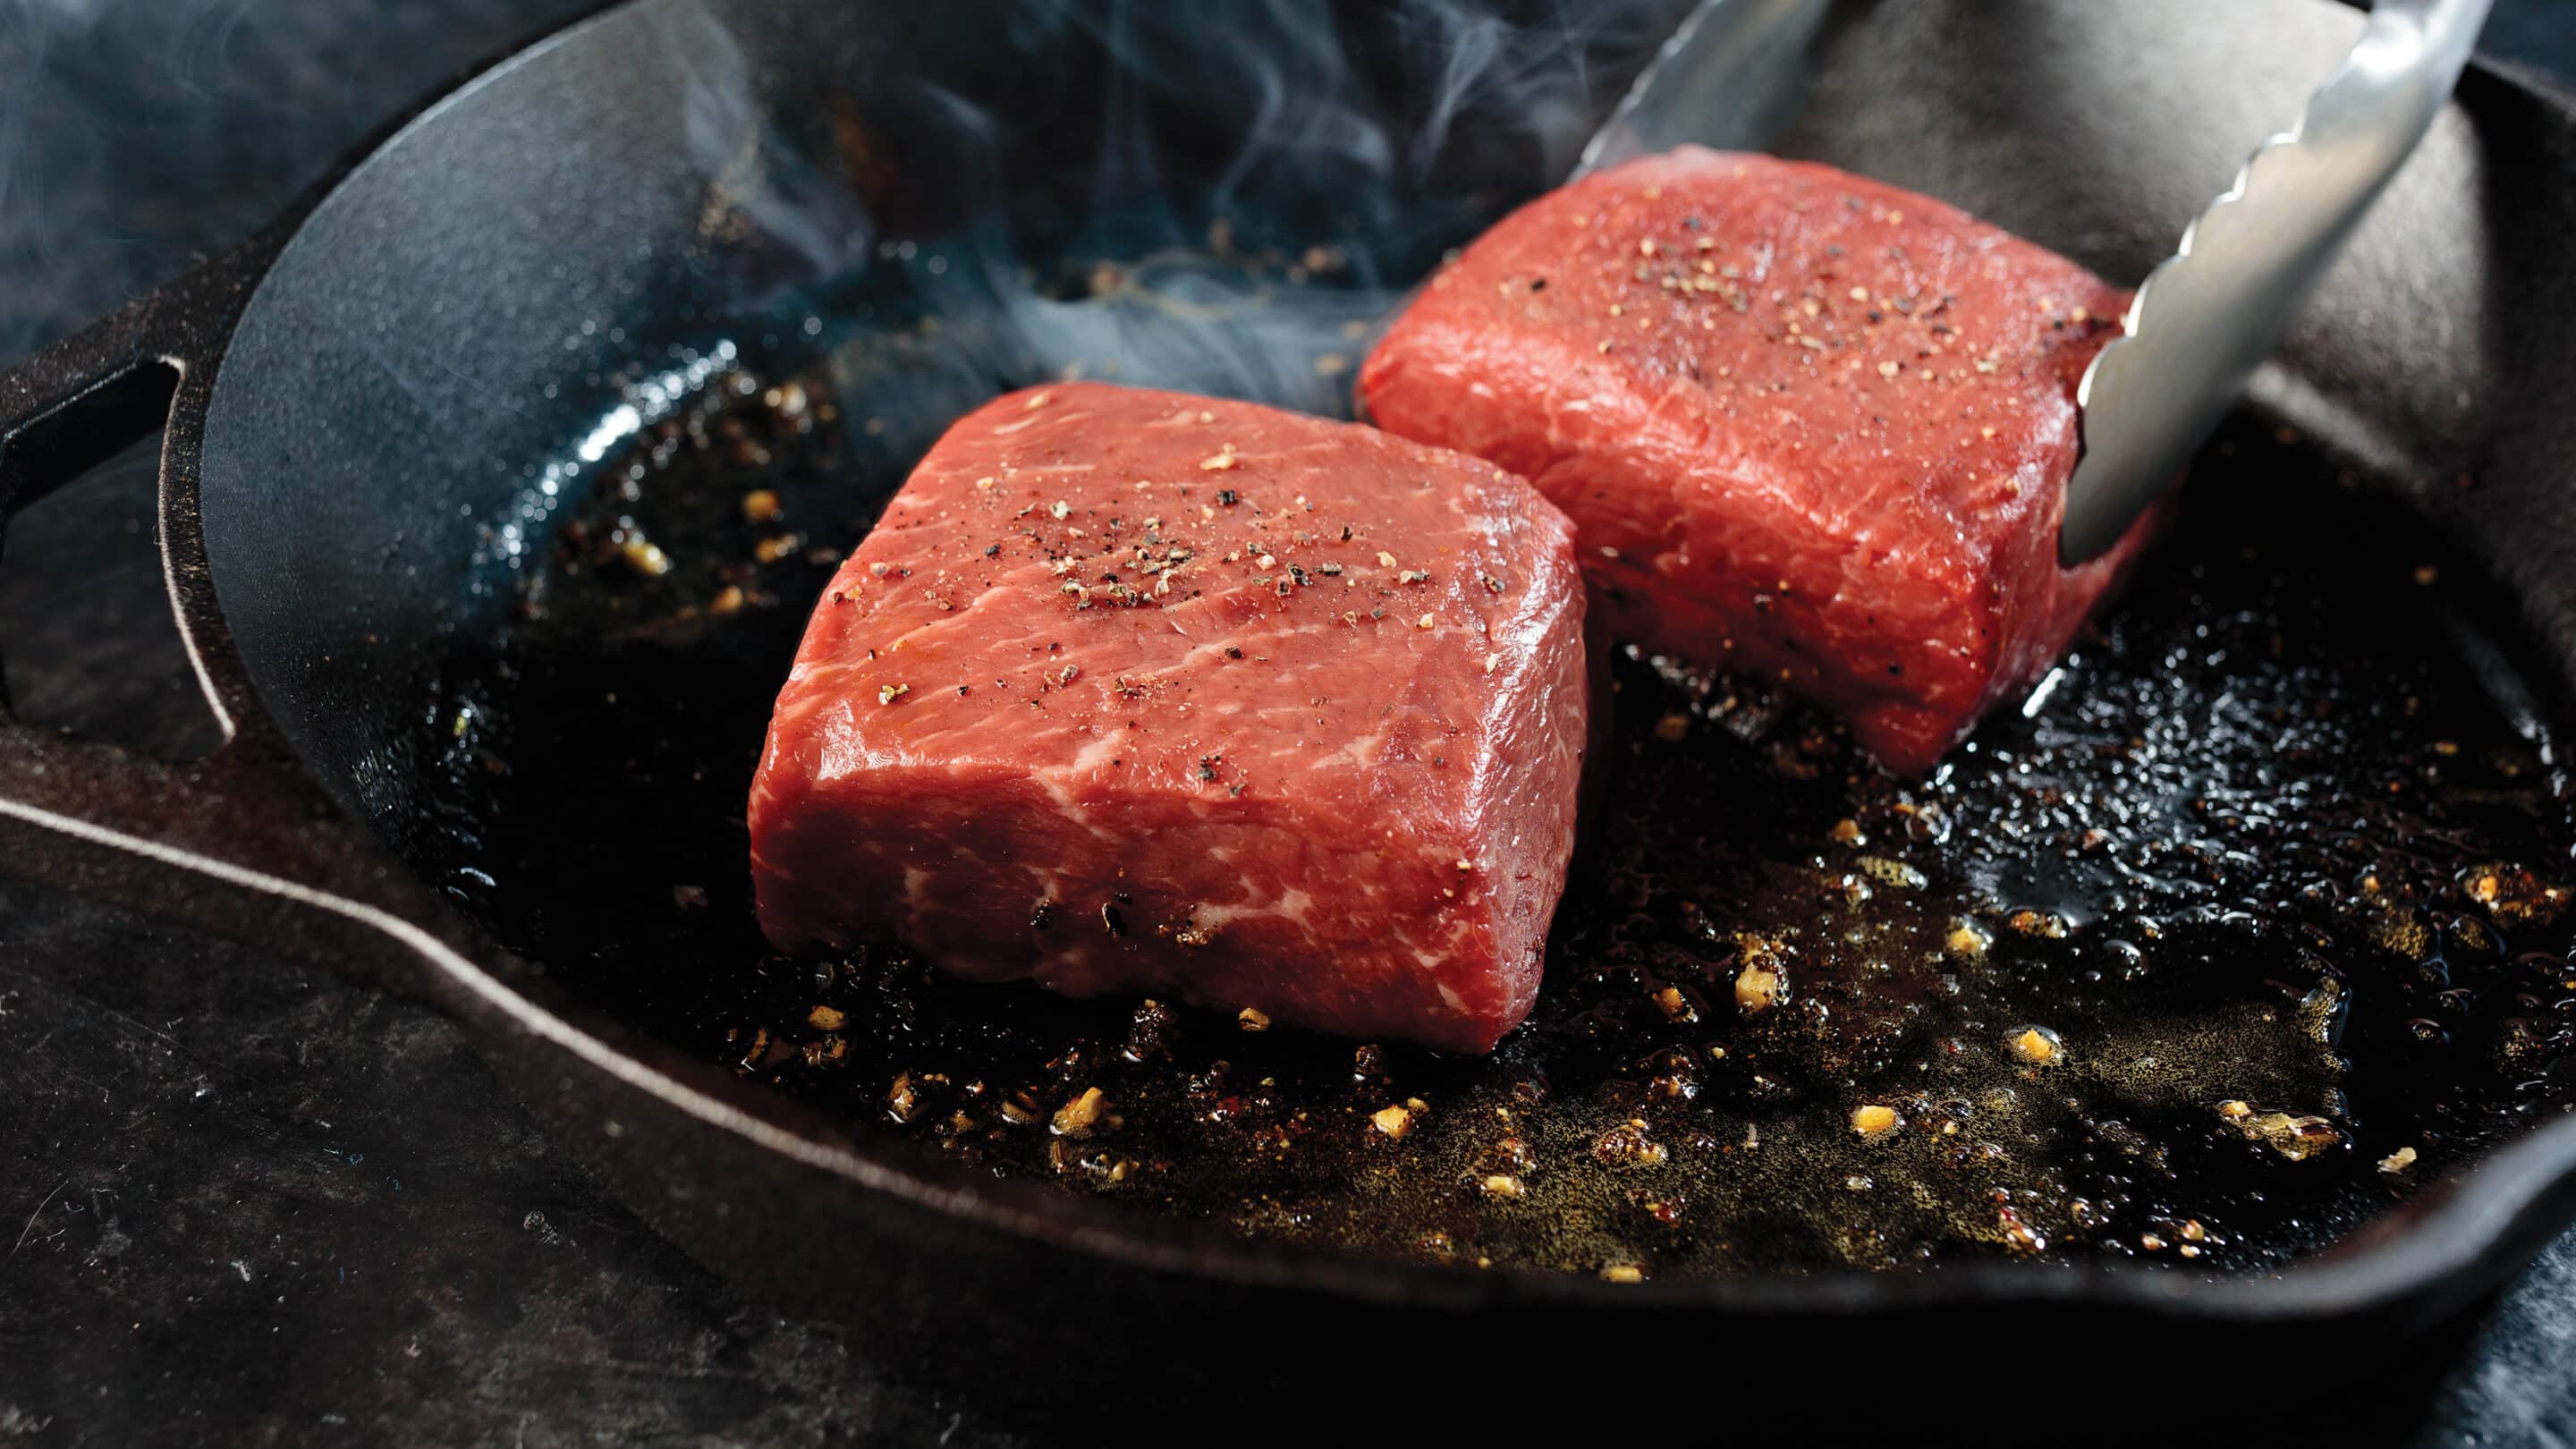 The Best Cuts of Steak: 10 Cuts Ranked Best to Worst